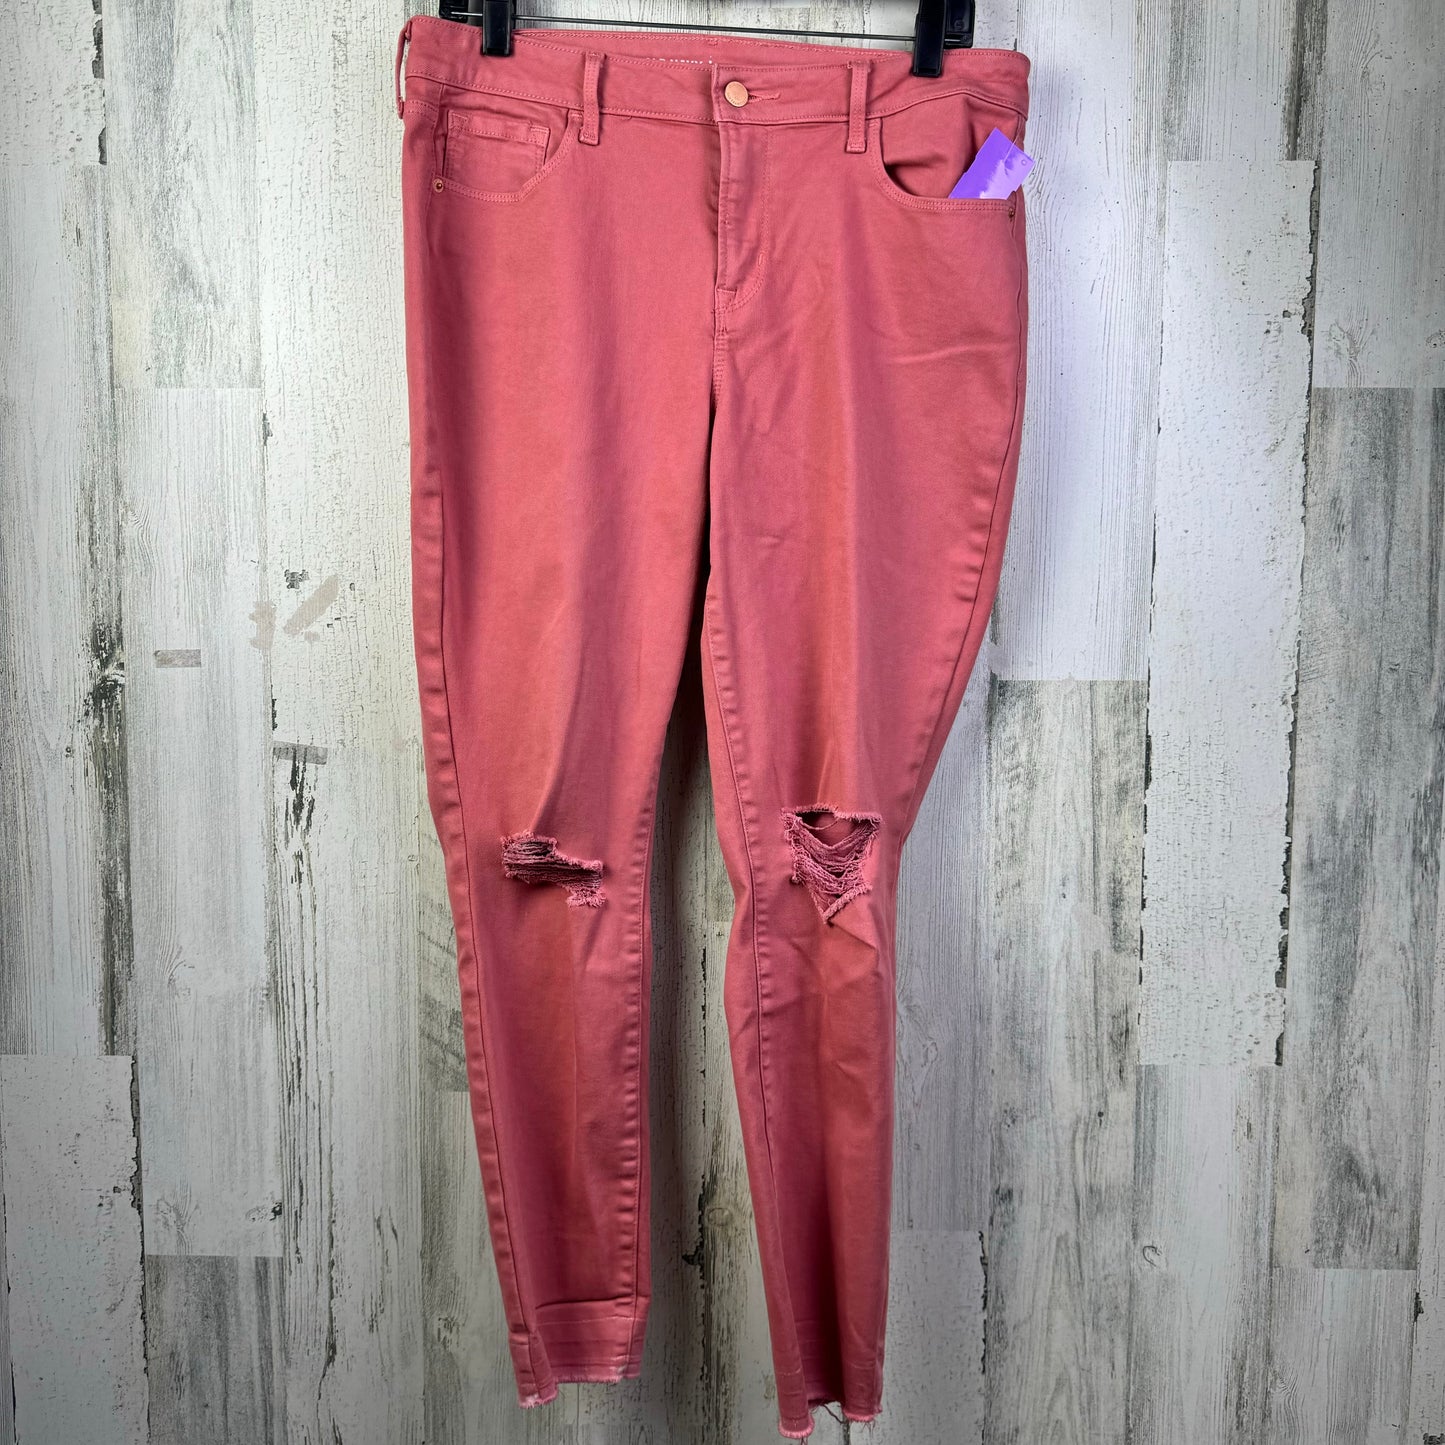 Pink Pants Cropped Old Navy, Size 8